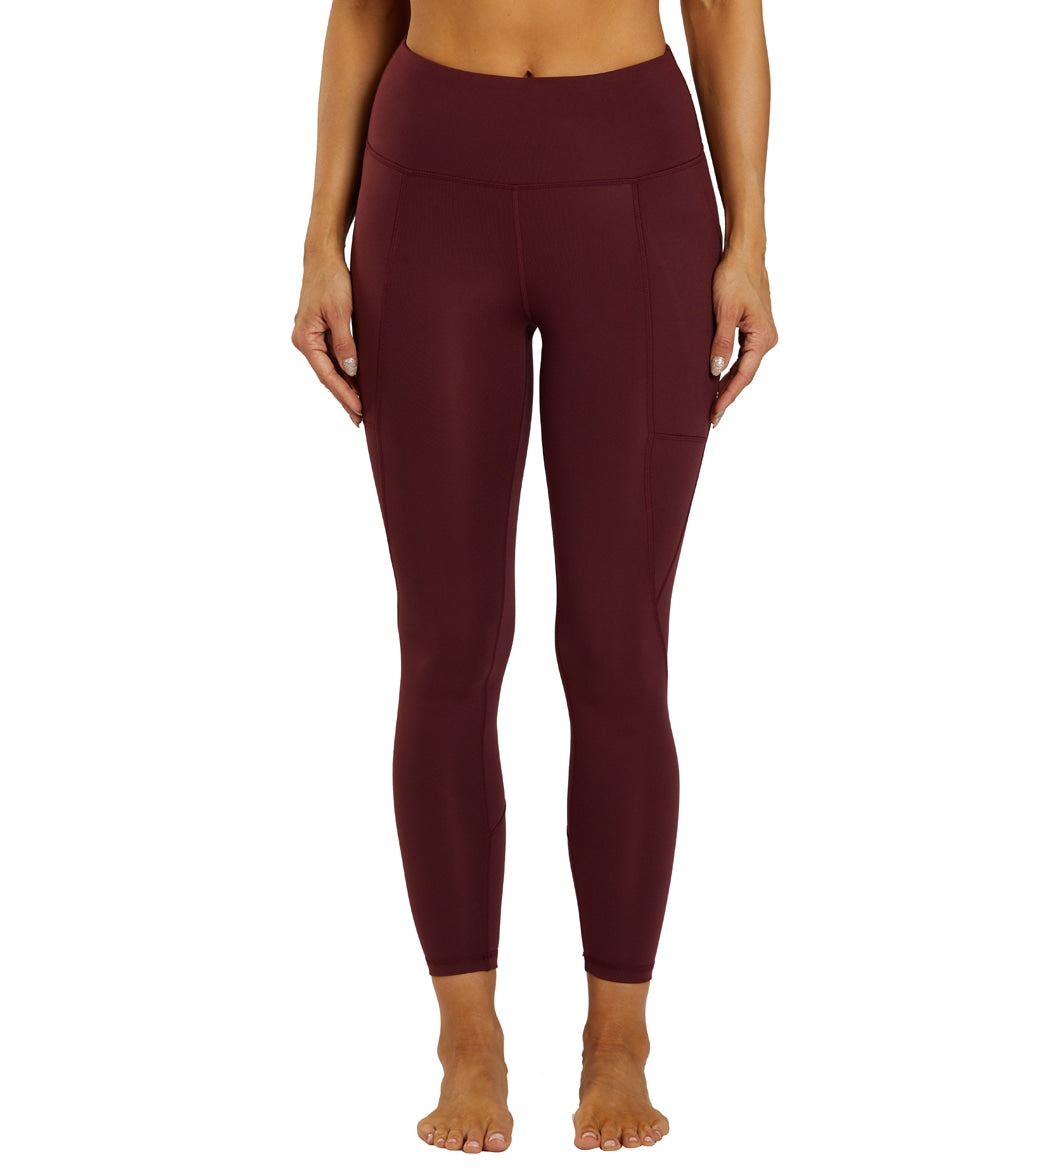 Balance Collection Valerie Strappy Yoga Leggings at